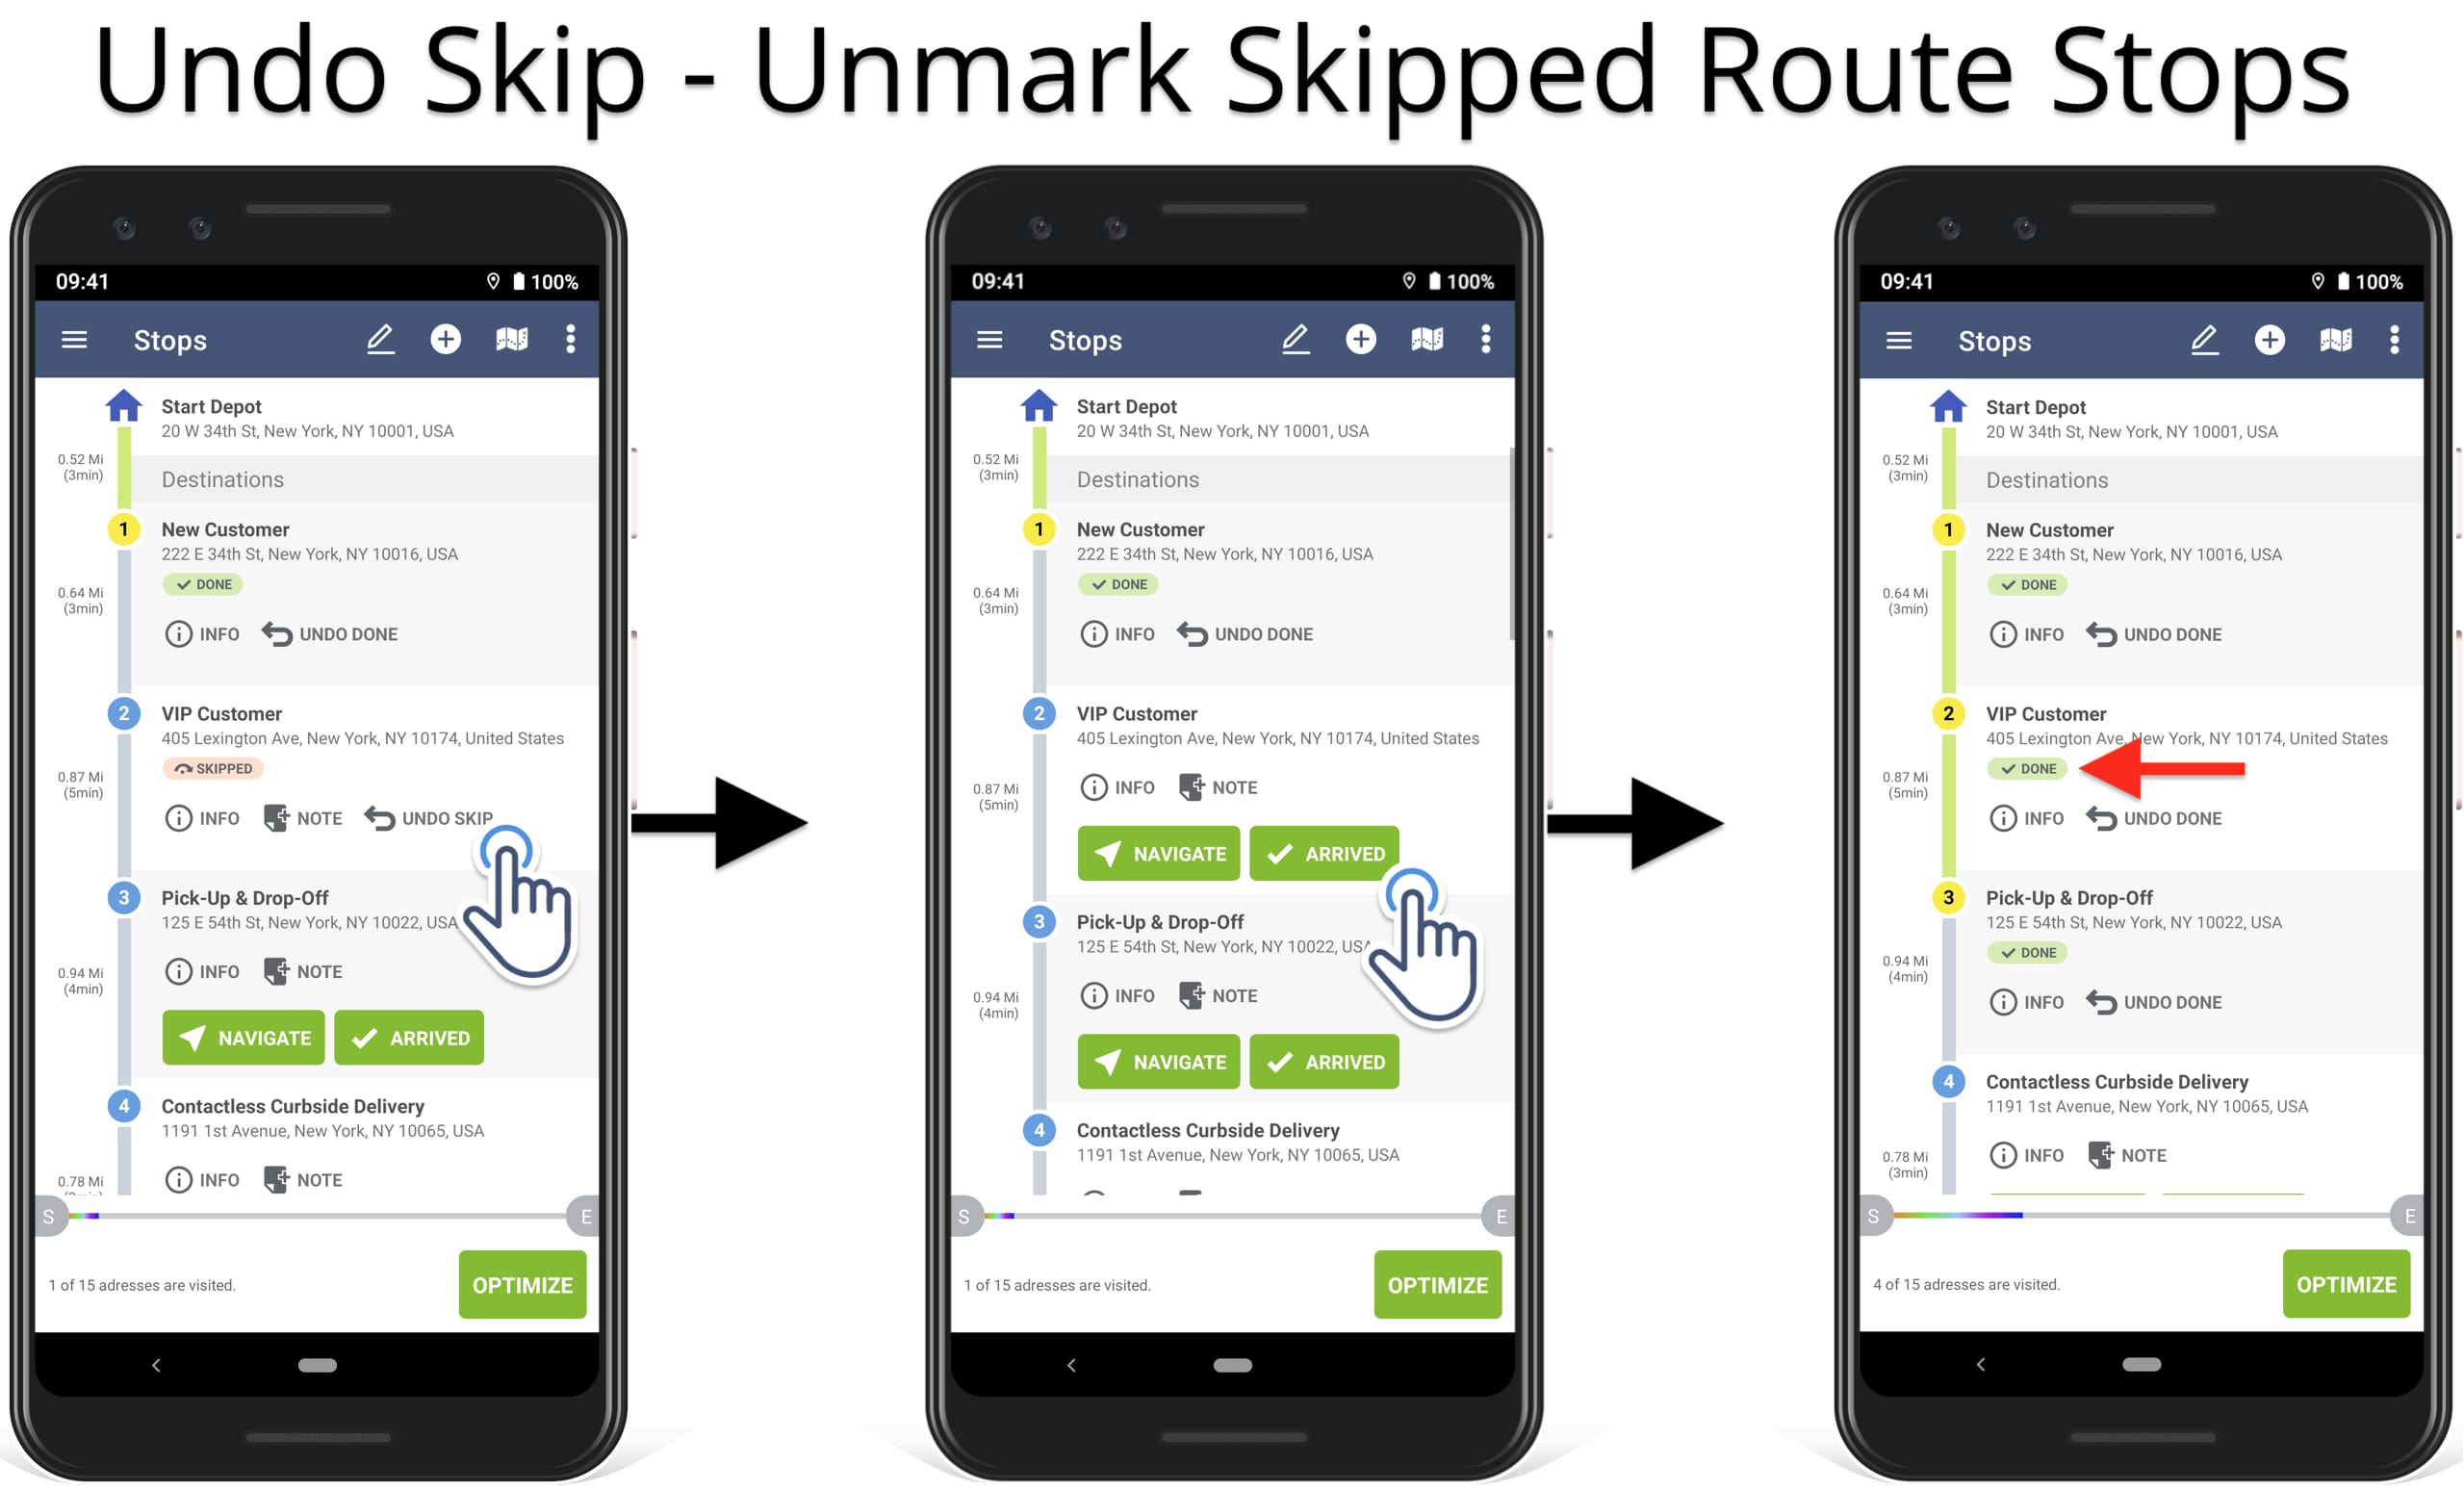 Undo skipped route stops on the route planner app when tracking the route progress.